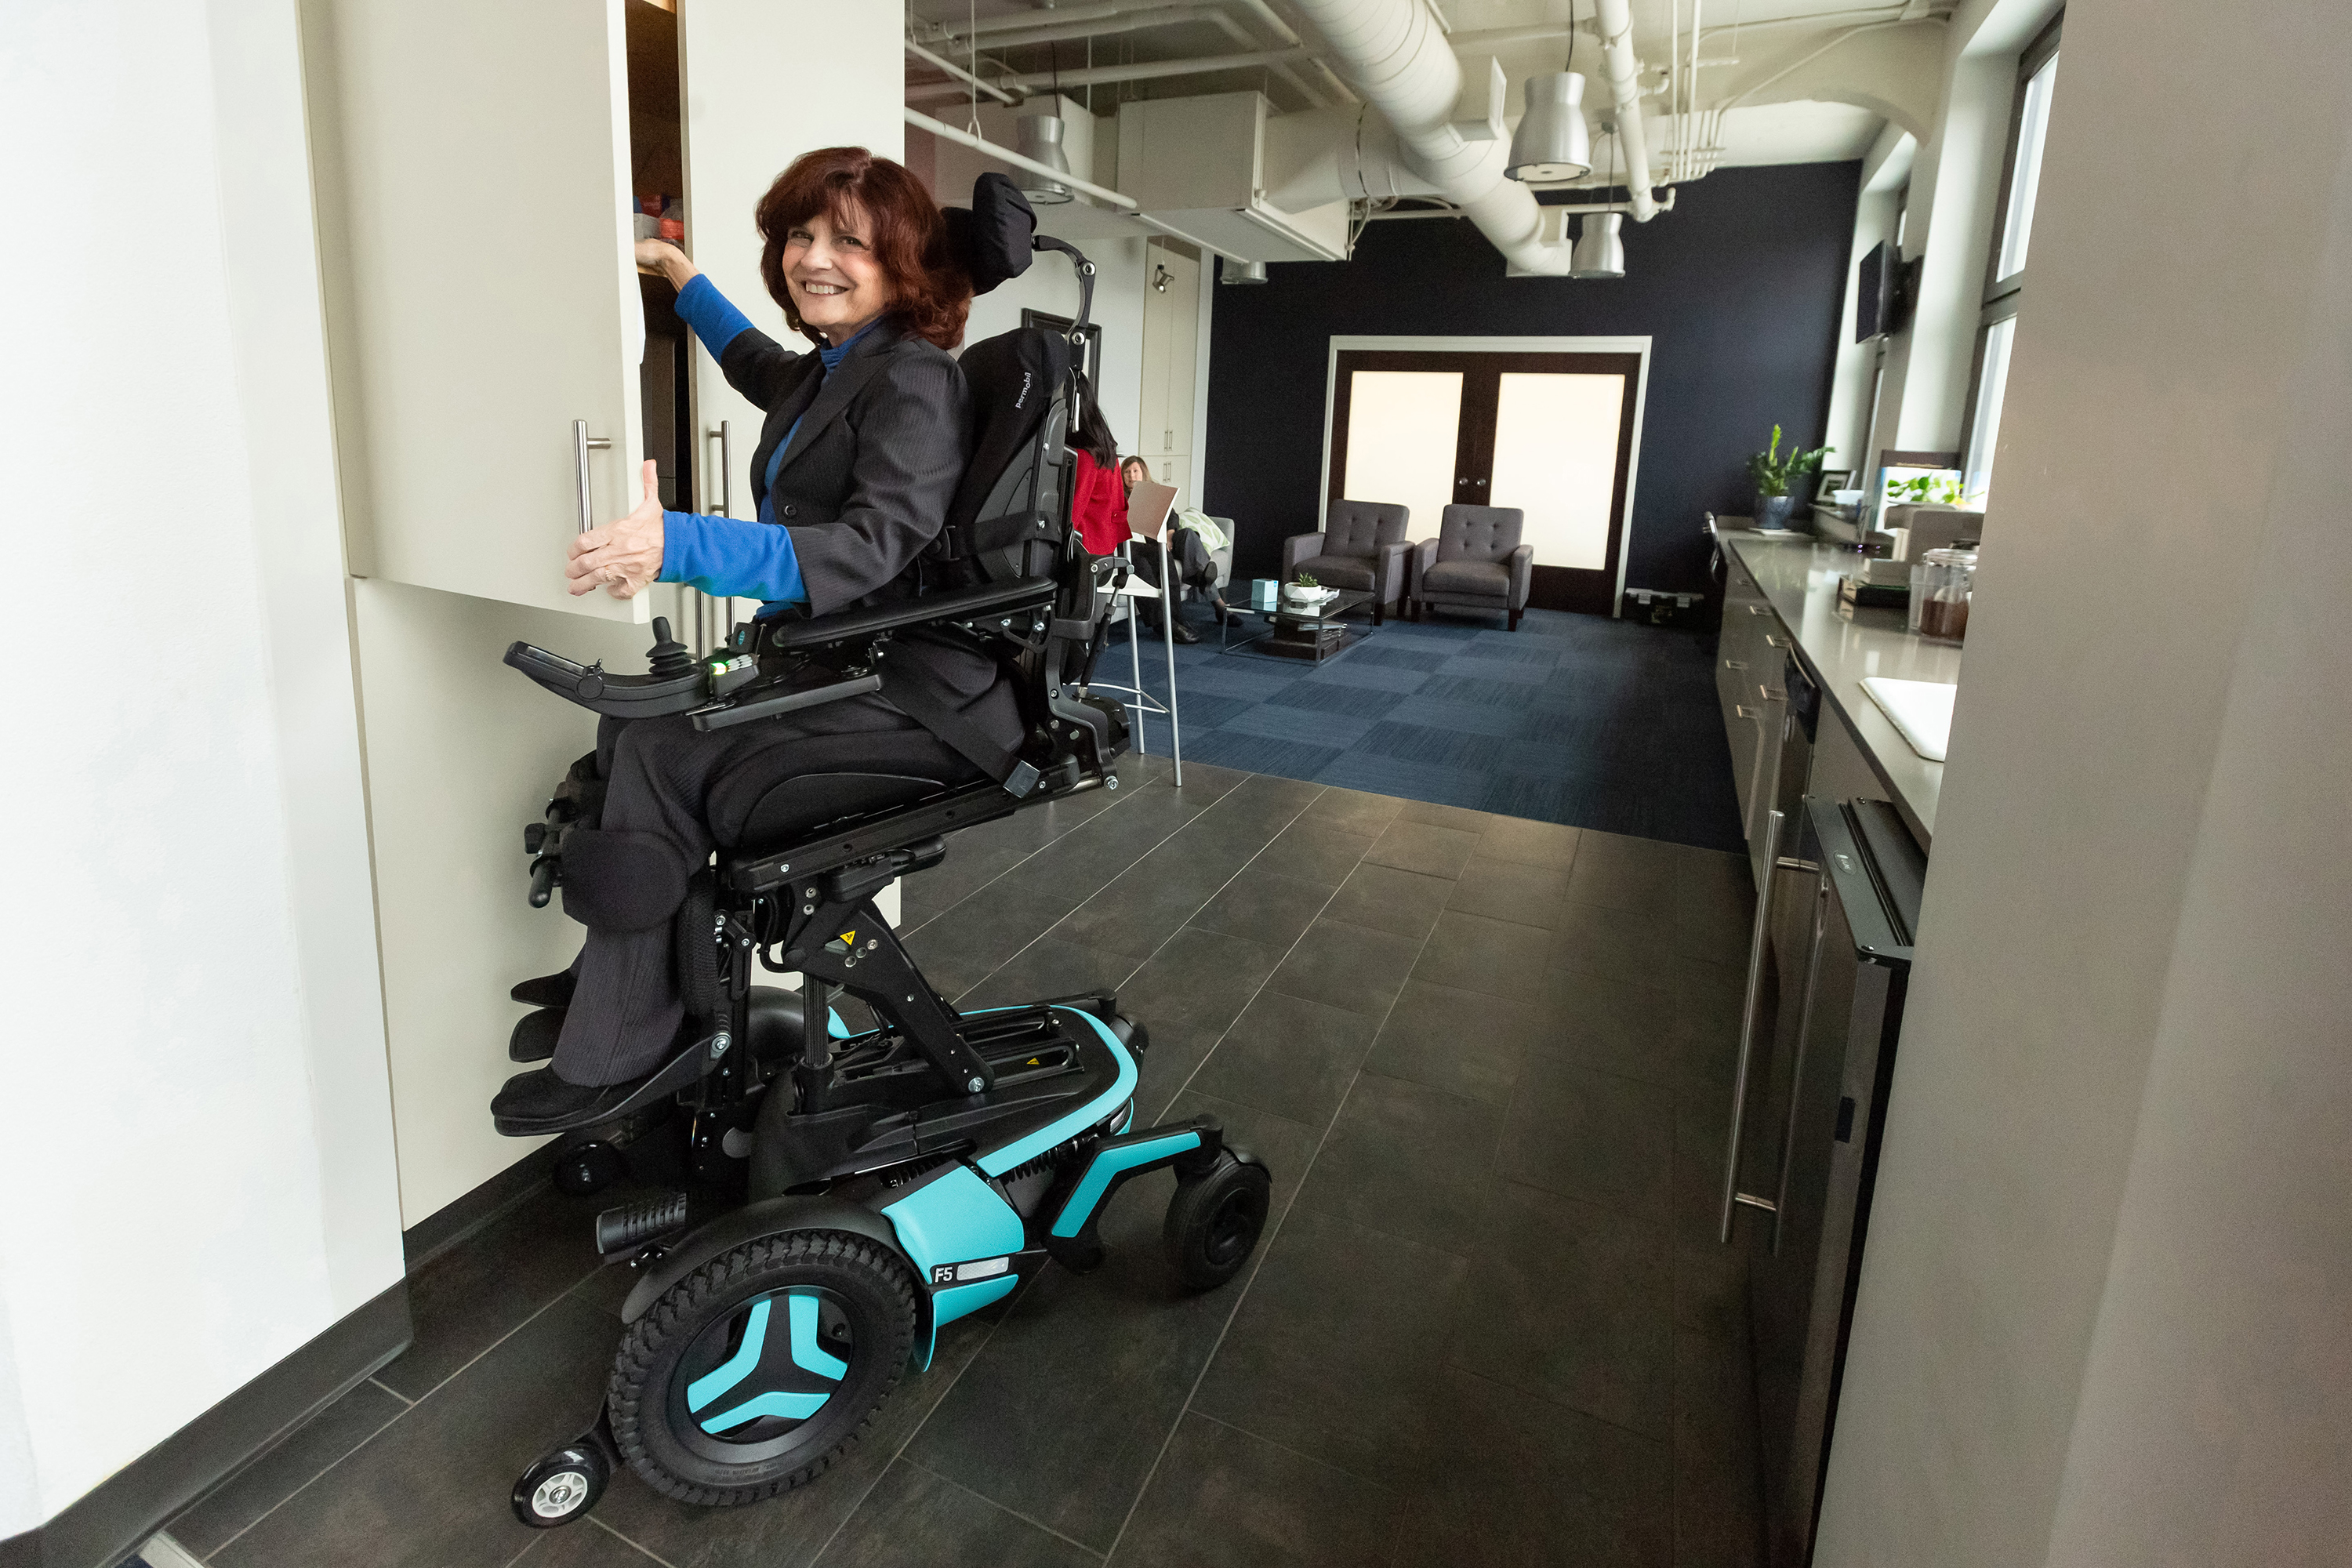 A Caucasian woman smiles and faces the camera. She is using her F5 power chair with light blue accents in ActiveReach position to access her upper cabinets.